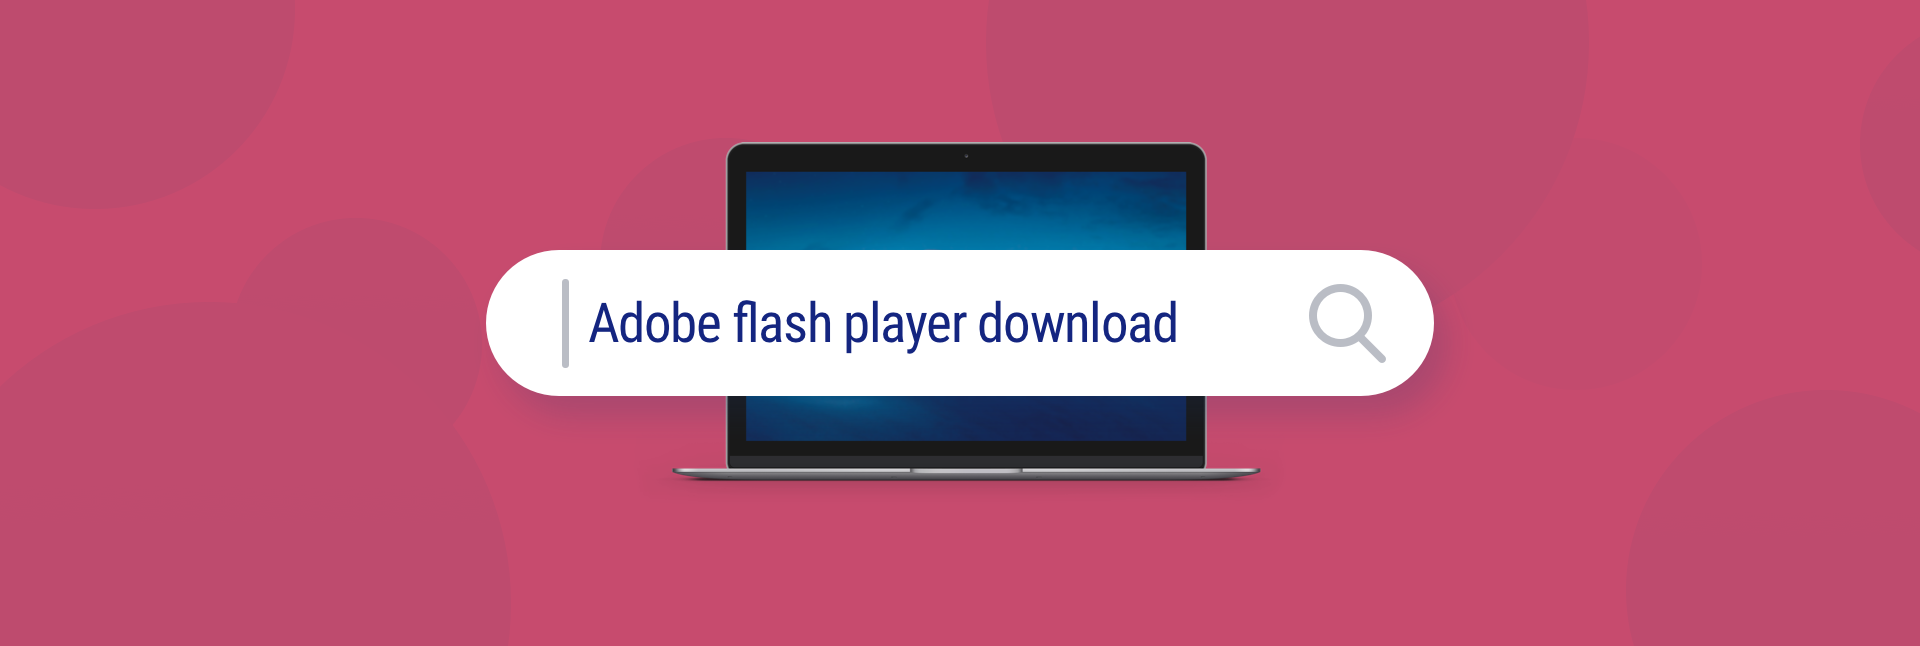 adobe flash player download for mac pro